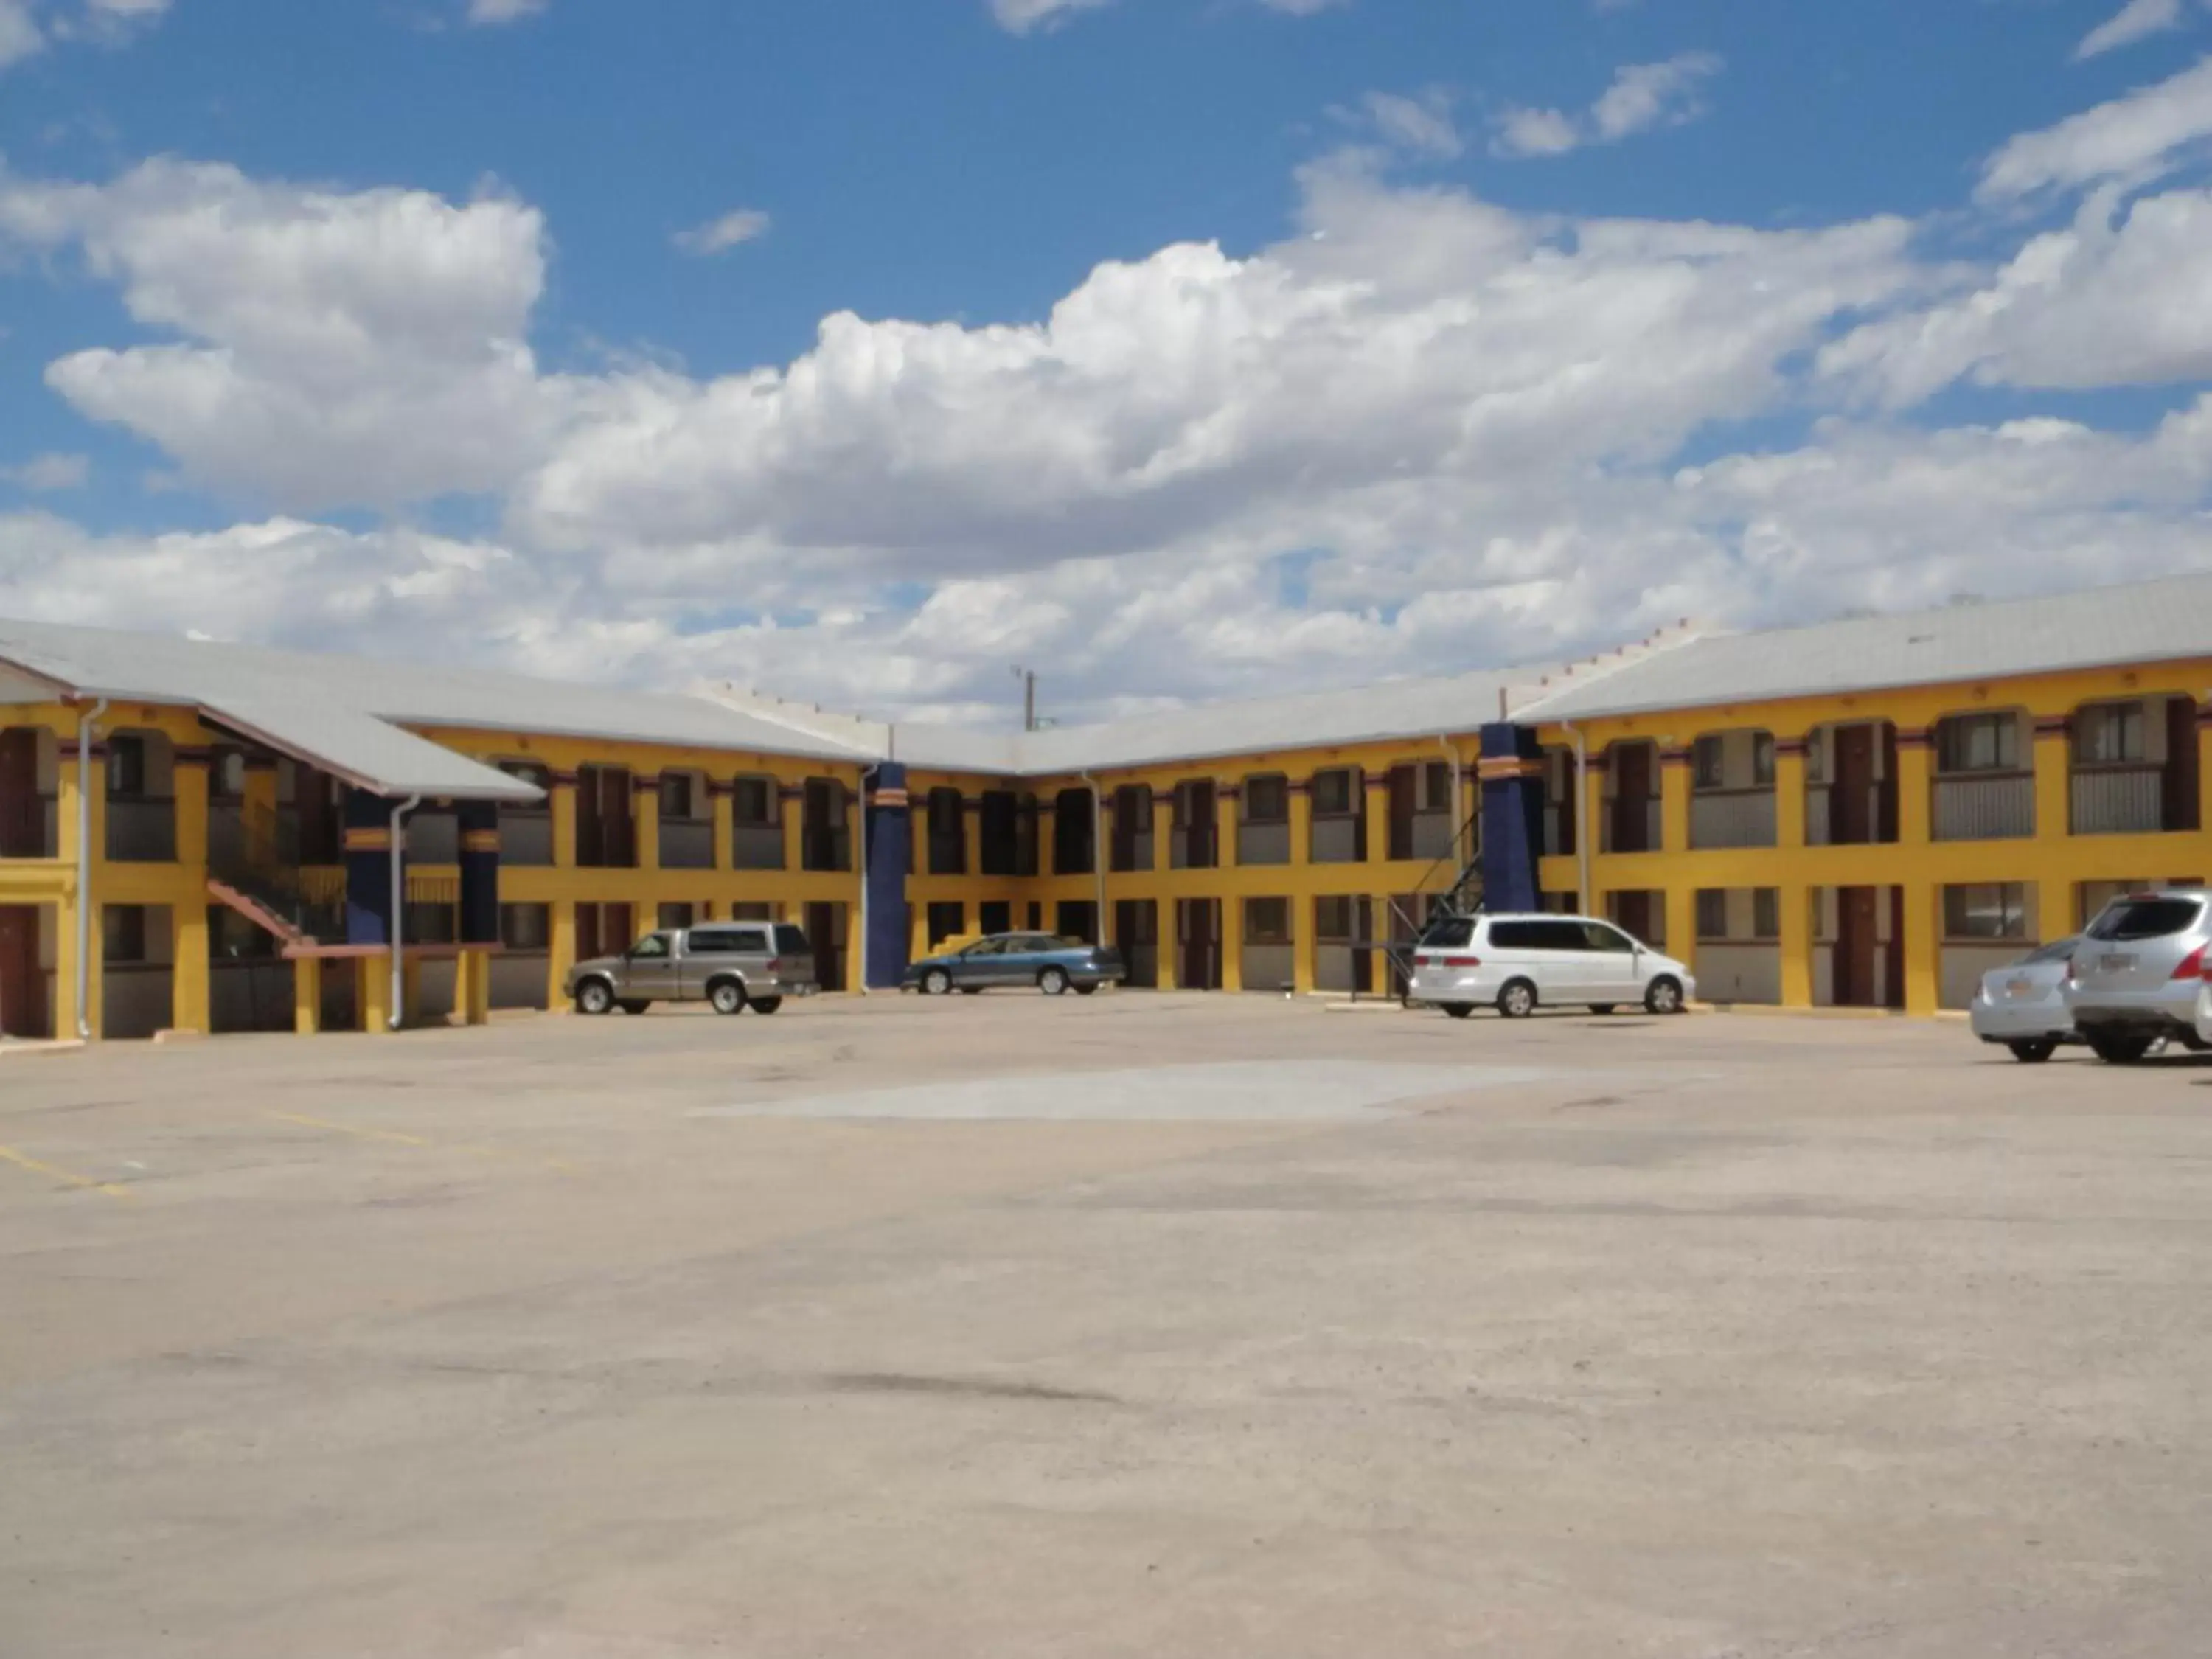 Property Building in Budget Inn Las Vegas New Mexico